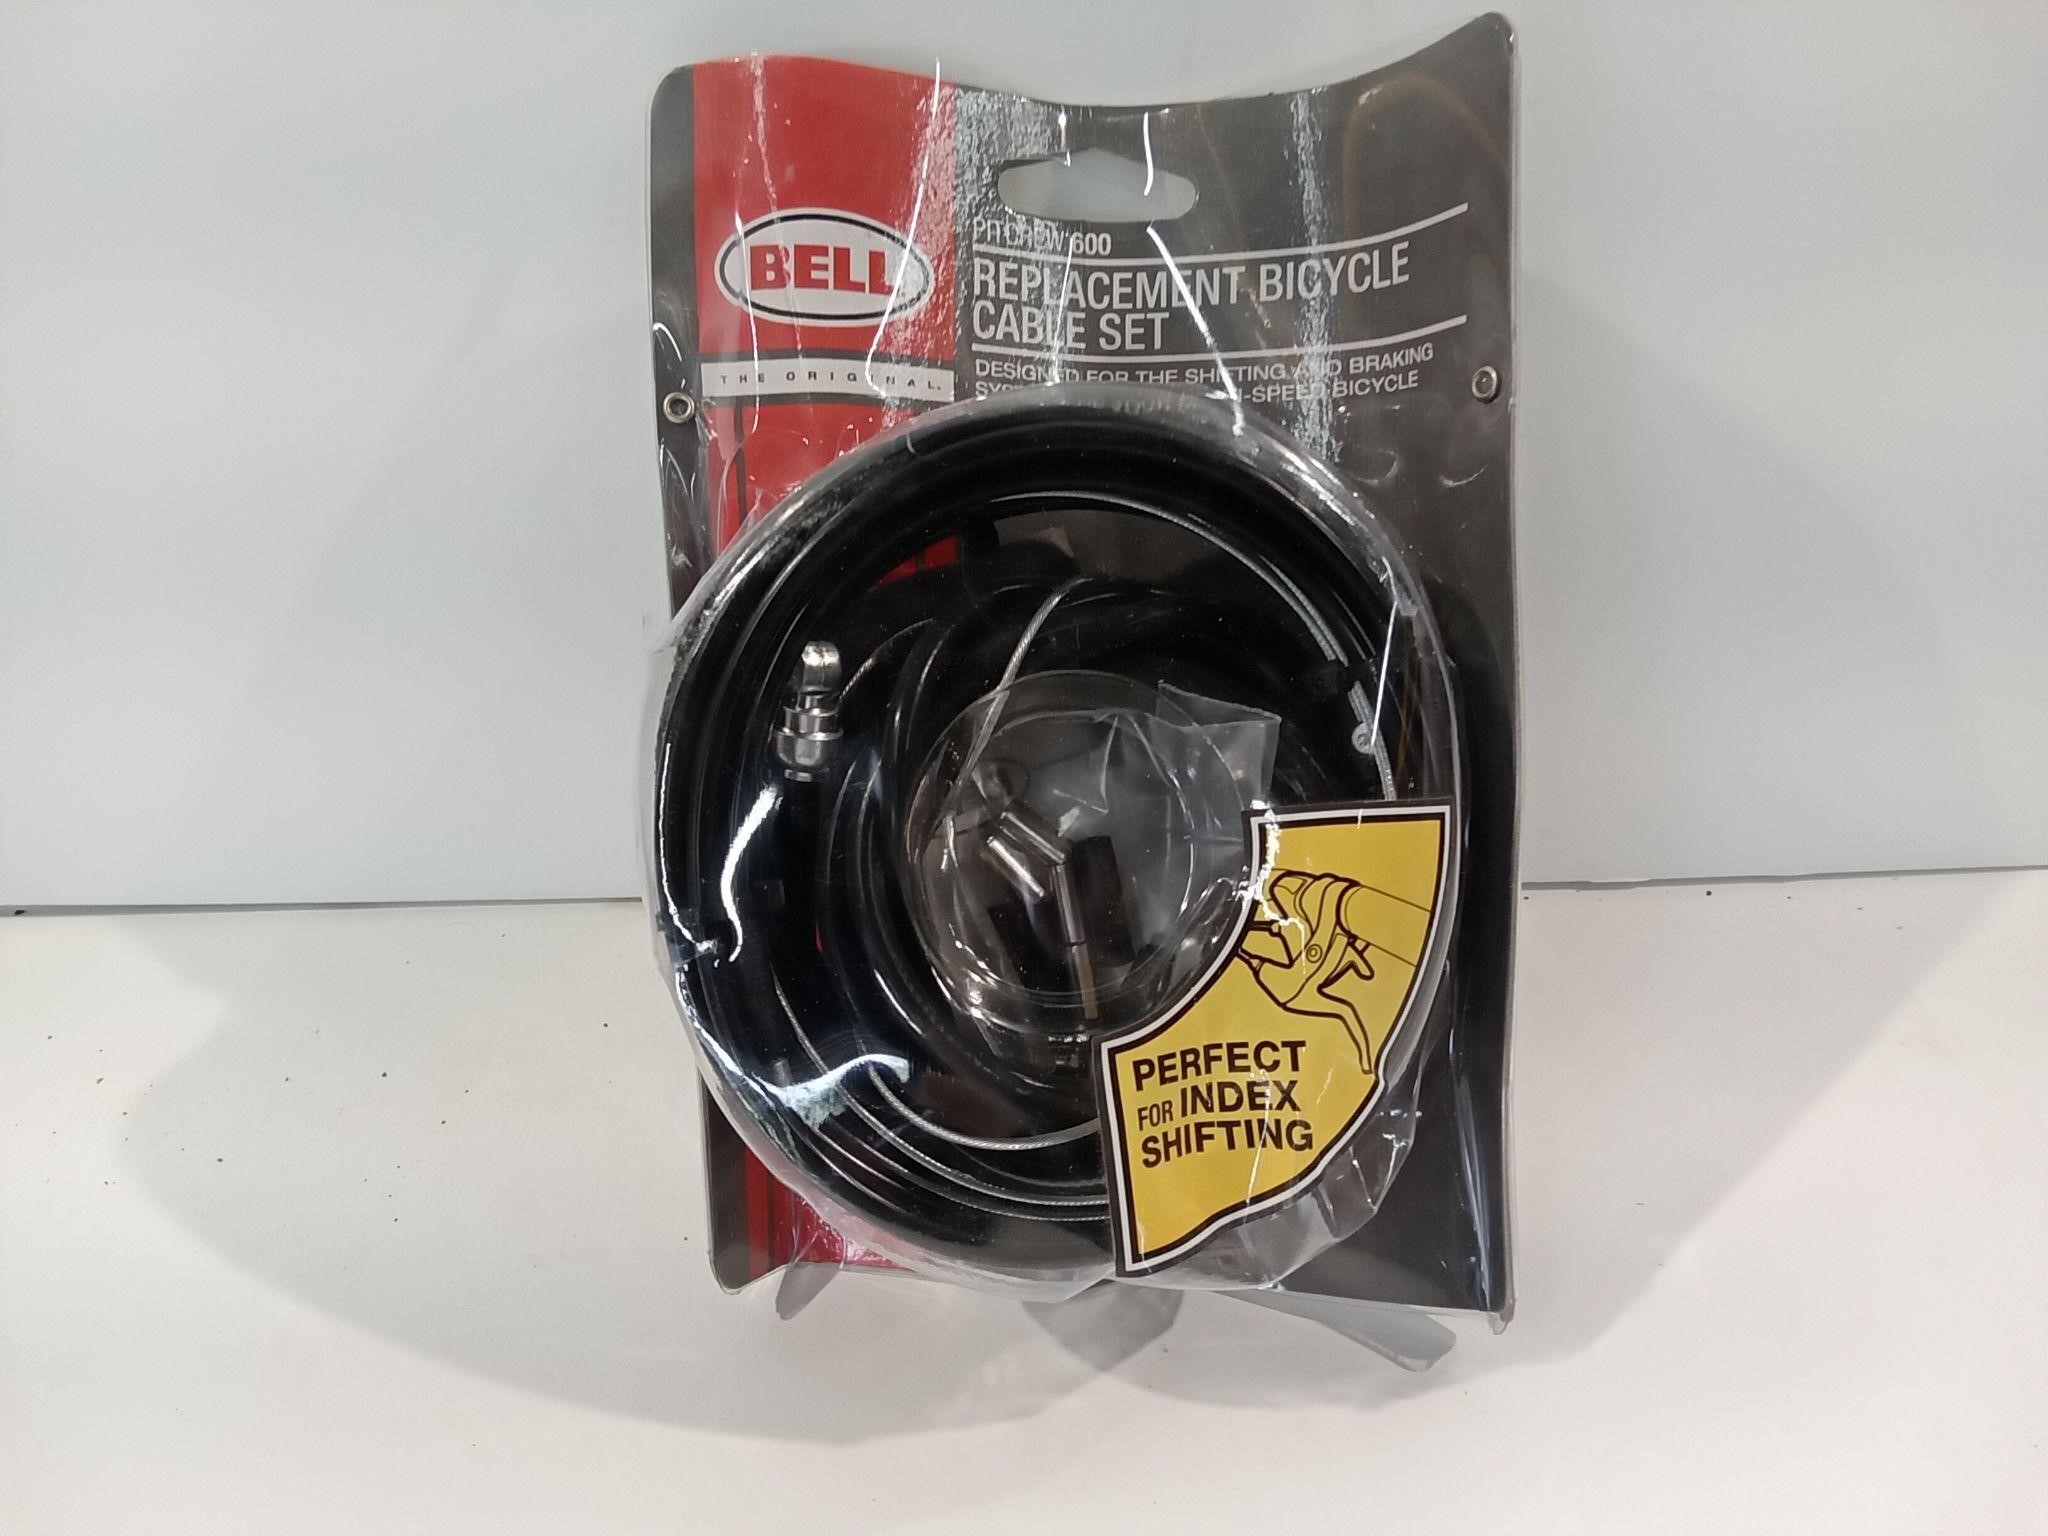 Bell Replacement Bicycle Cable Set